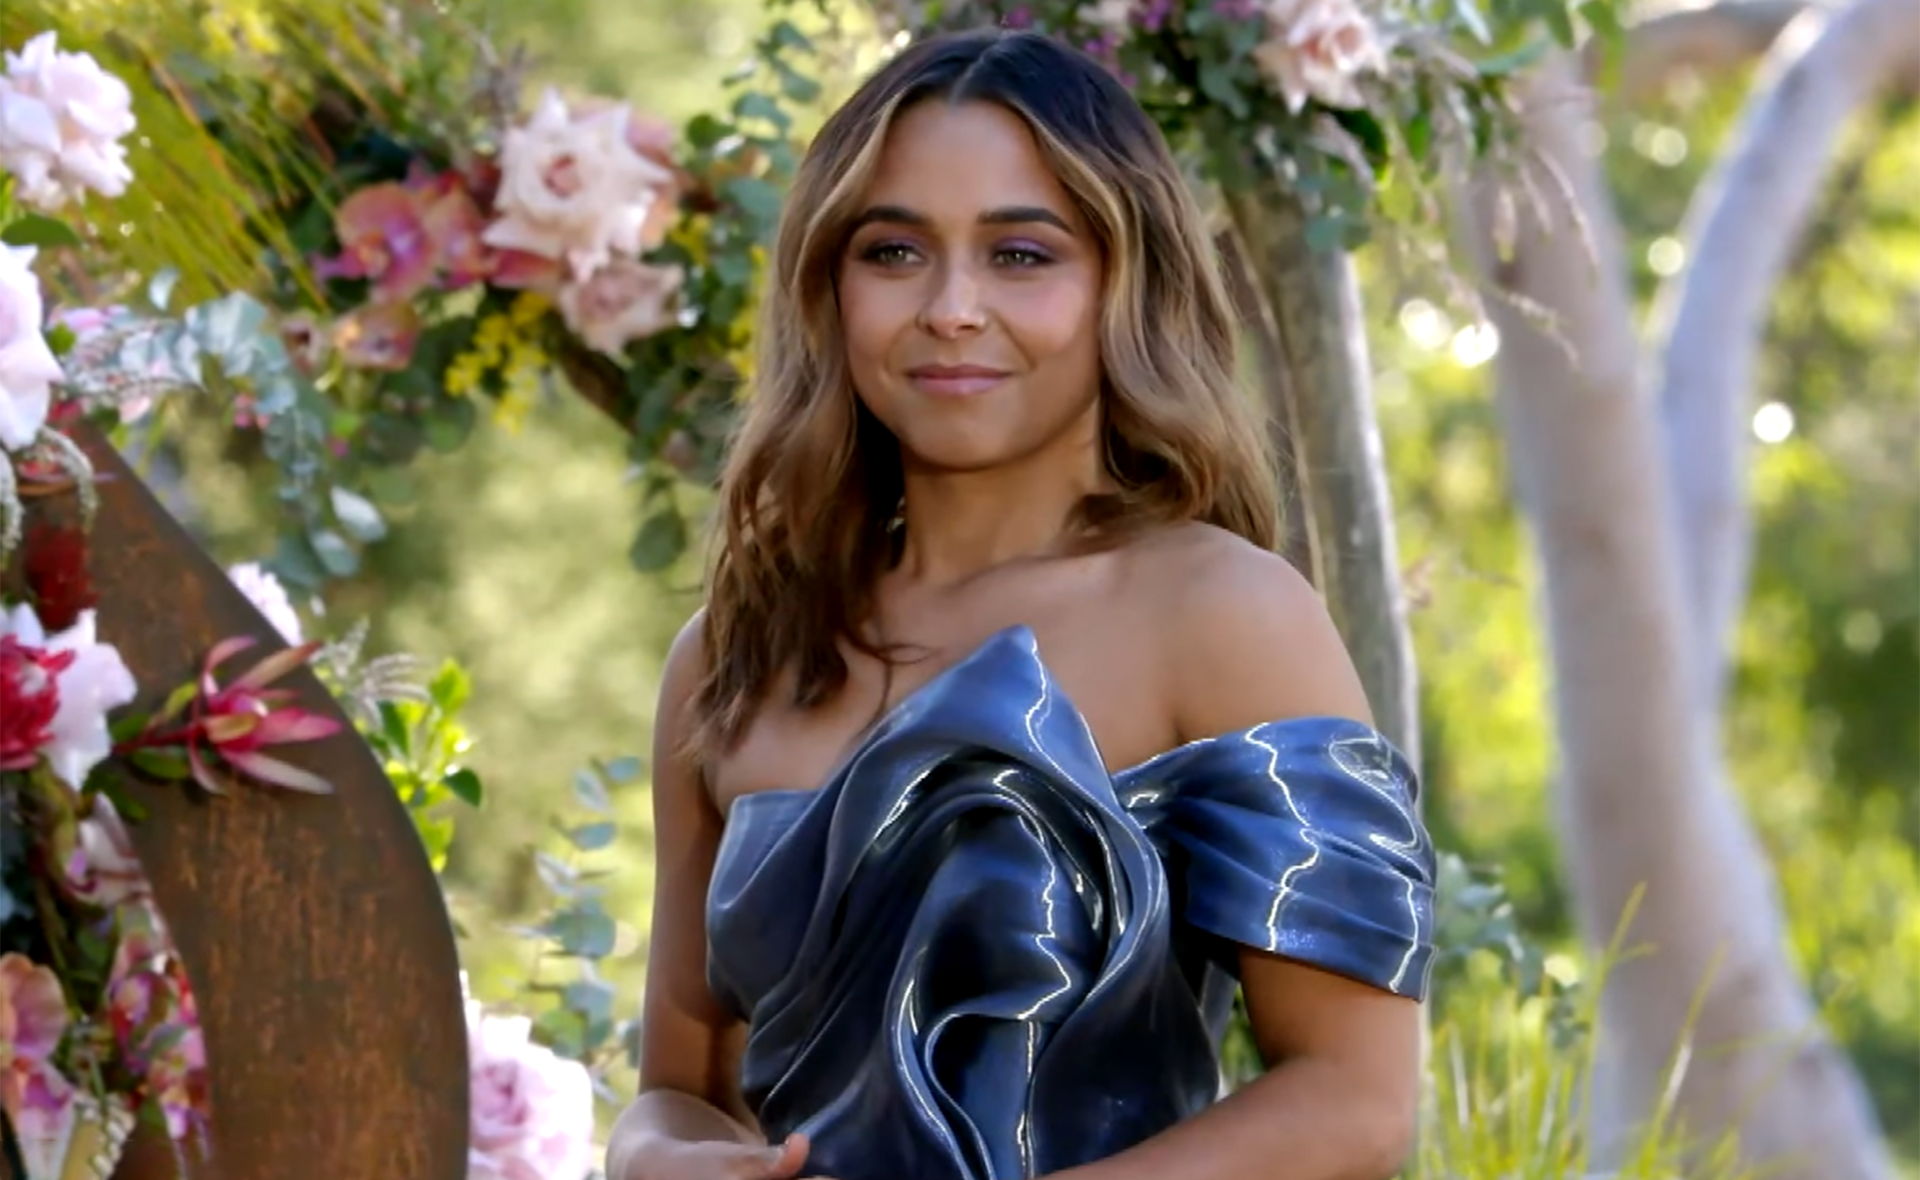 Does this huge clue totally give away who wins The Bachelorette 2021? Brooke Blurton’s true love may have already leaked